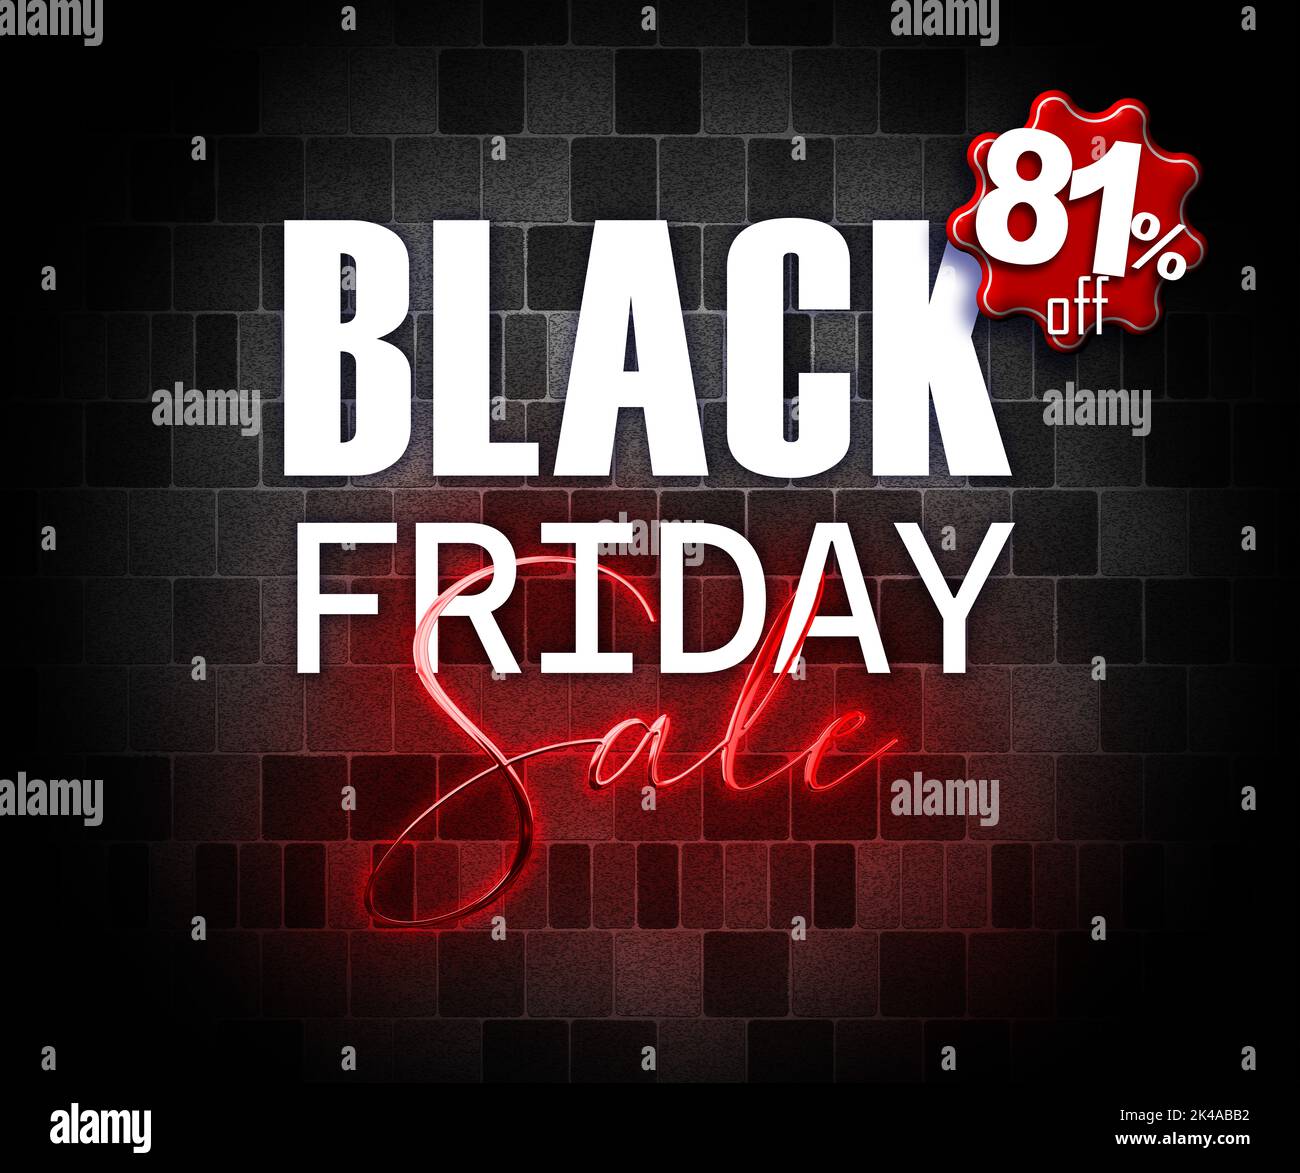 illustration with 3d elements black friday promotion banner 81 percent off sales increase Stock Photo